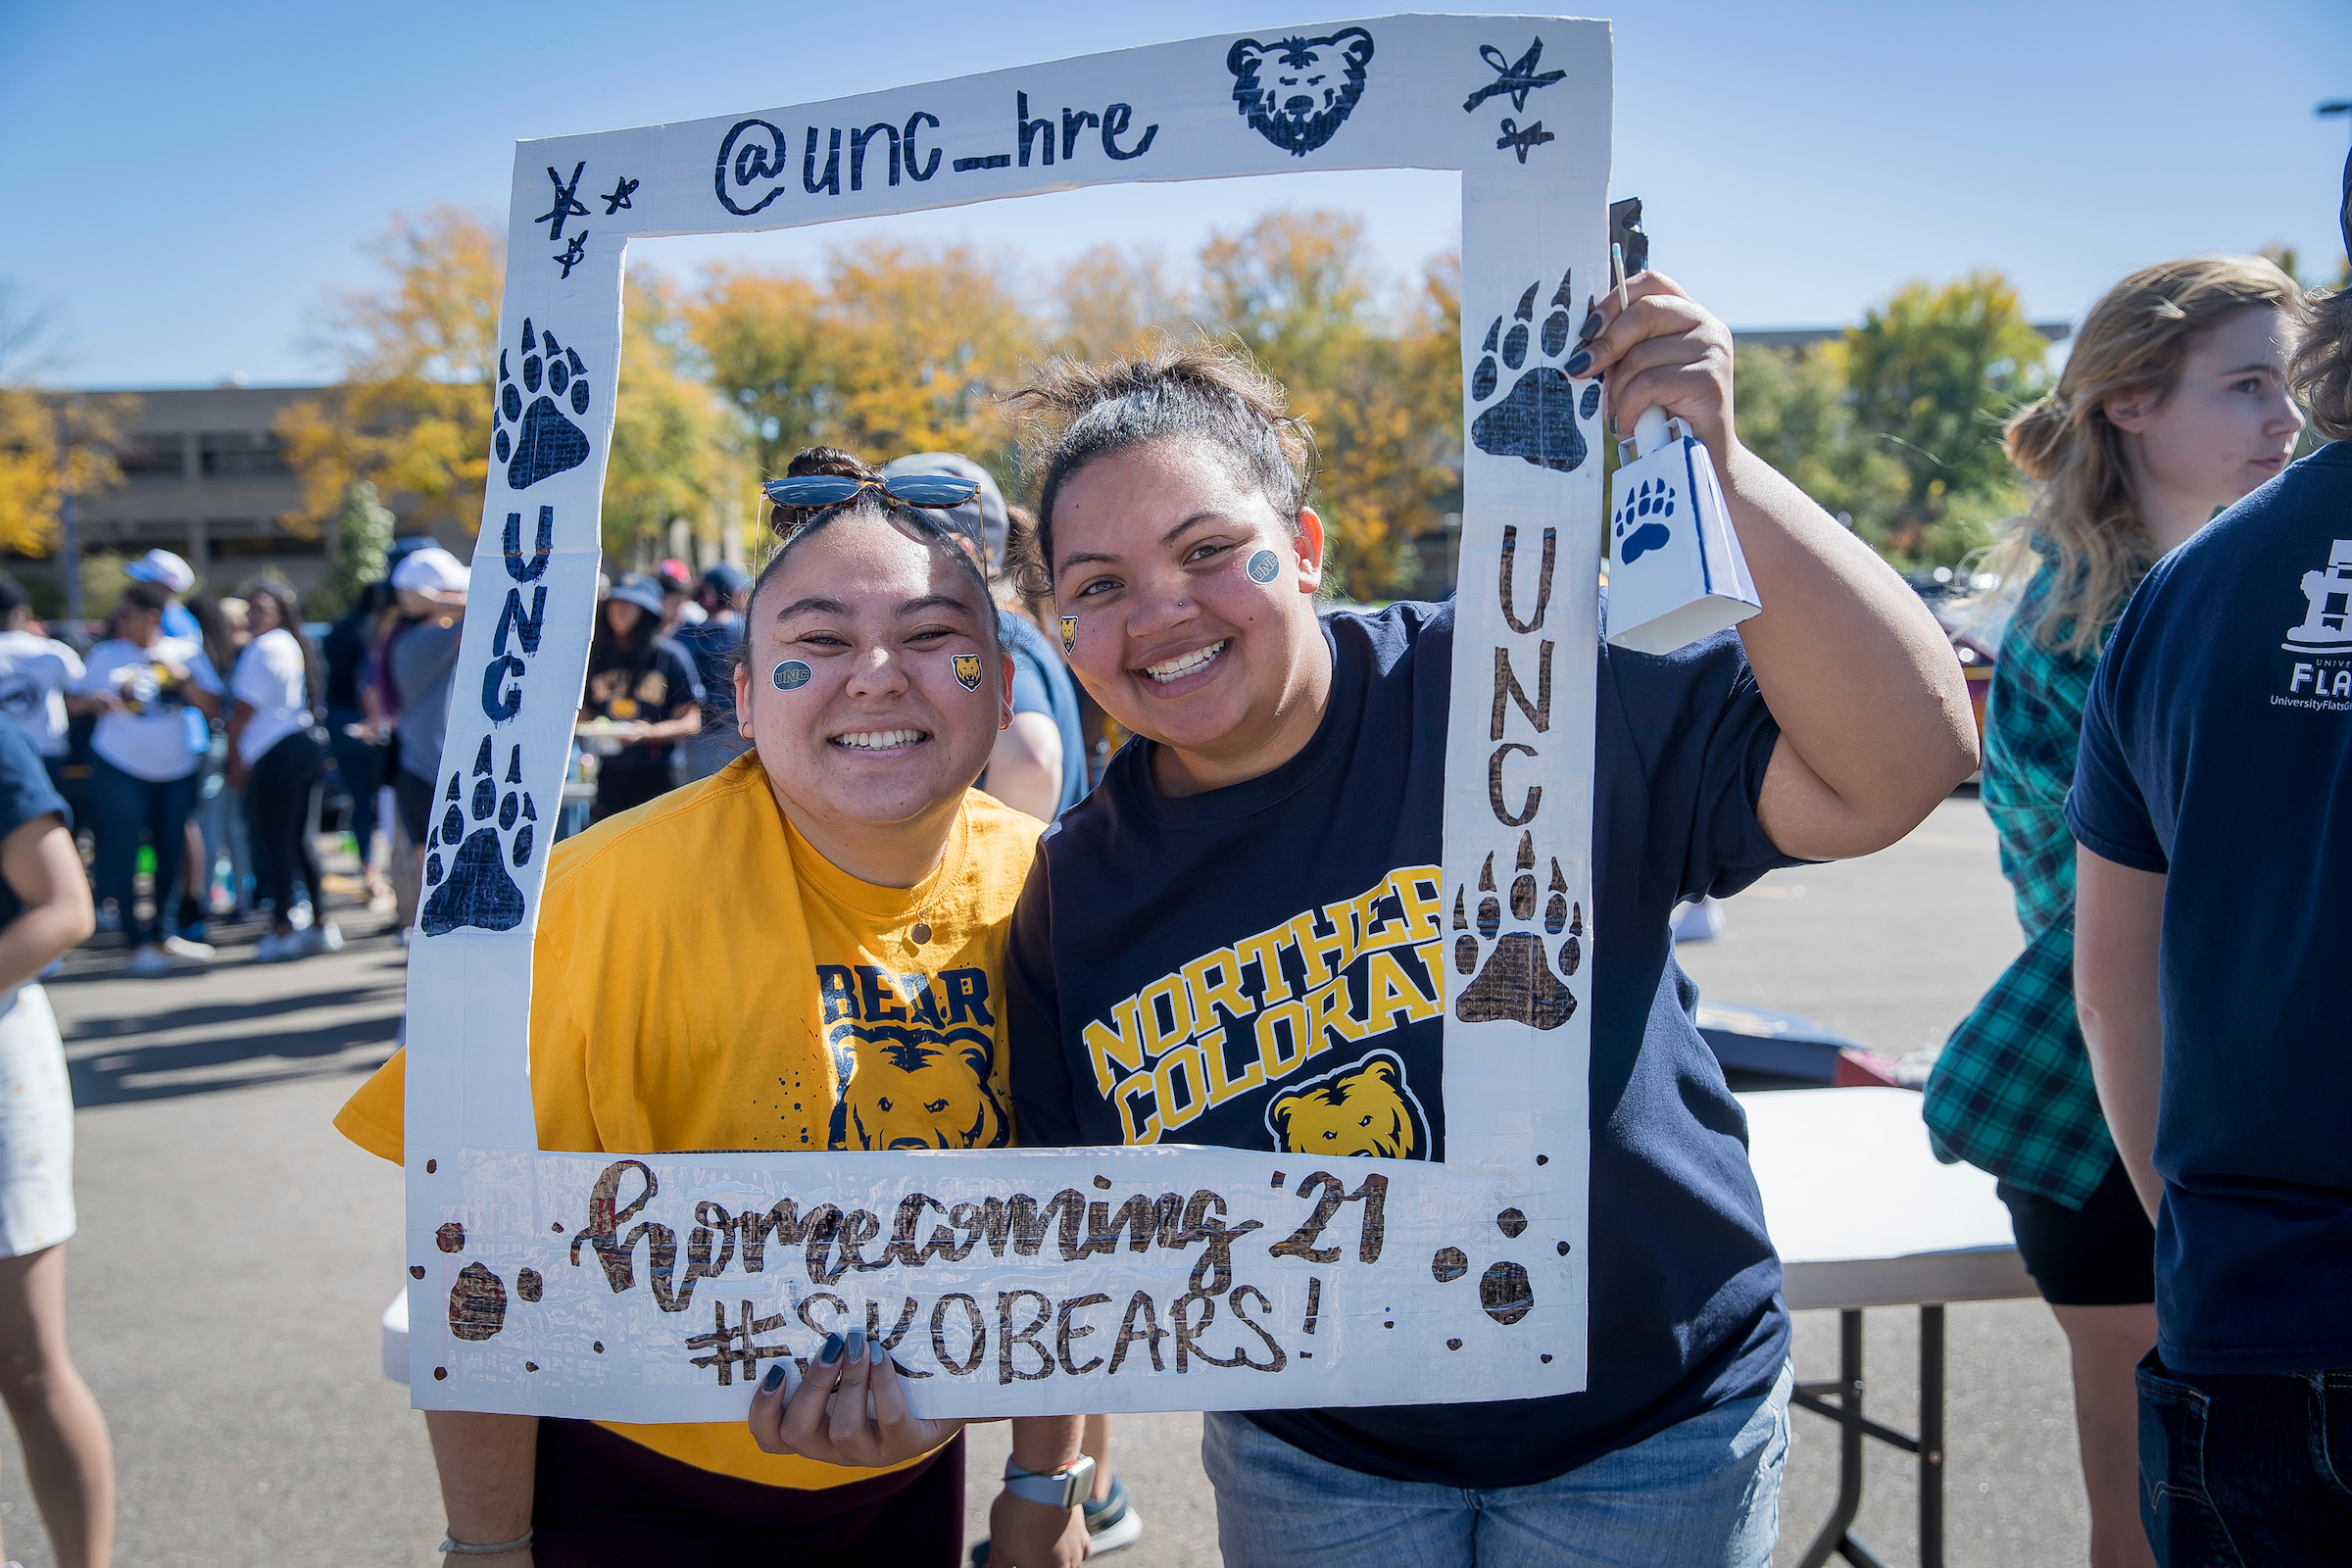 Fans join the tailgate fun